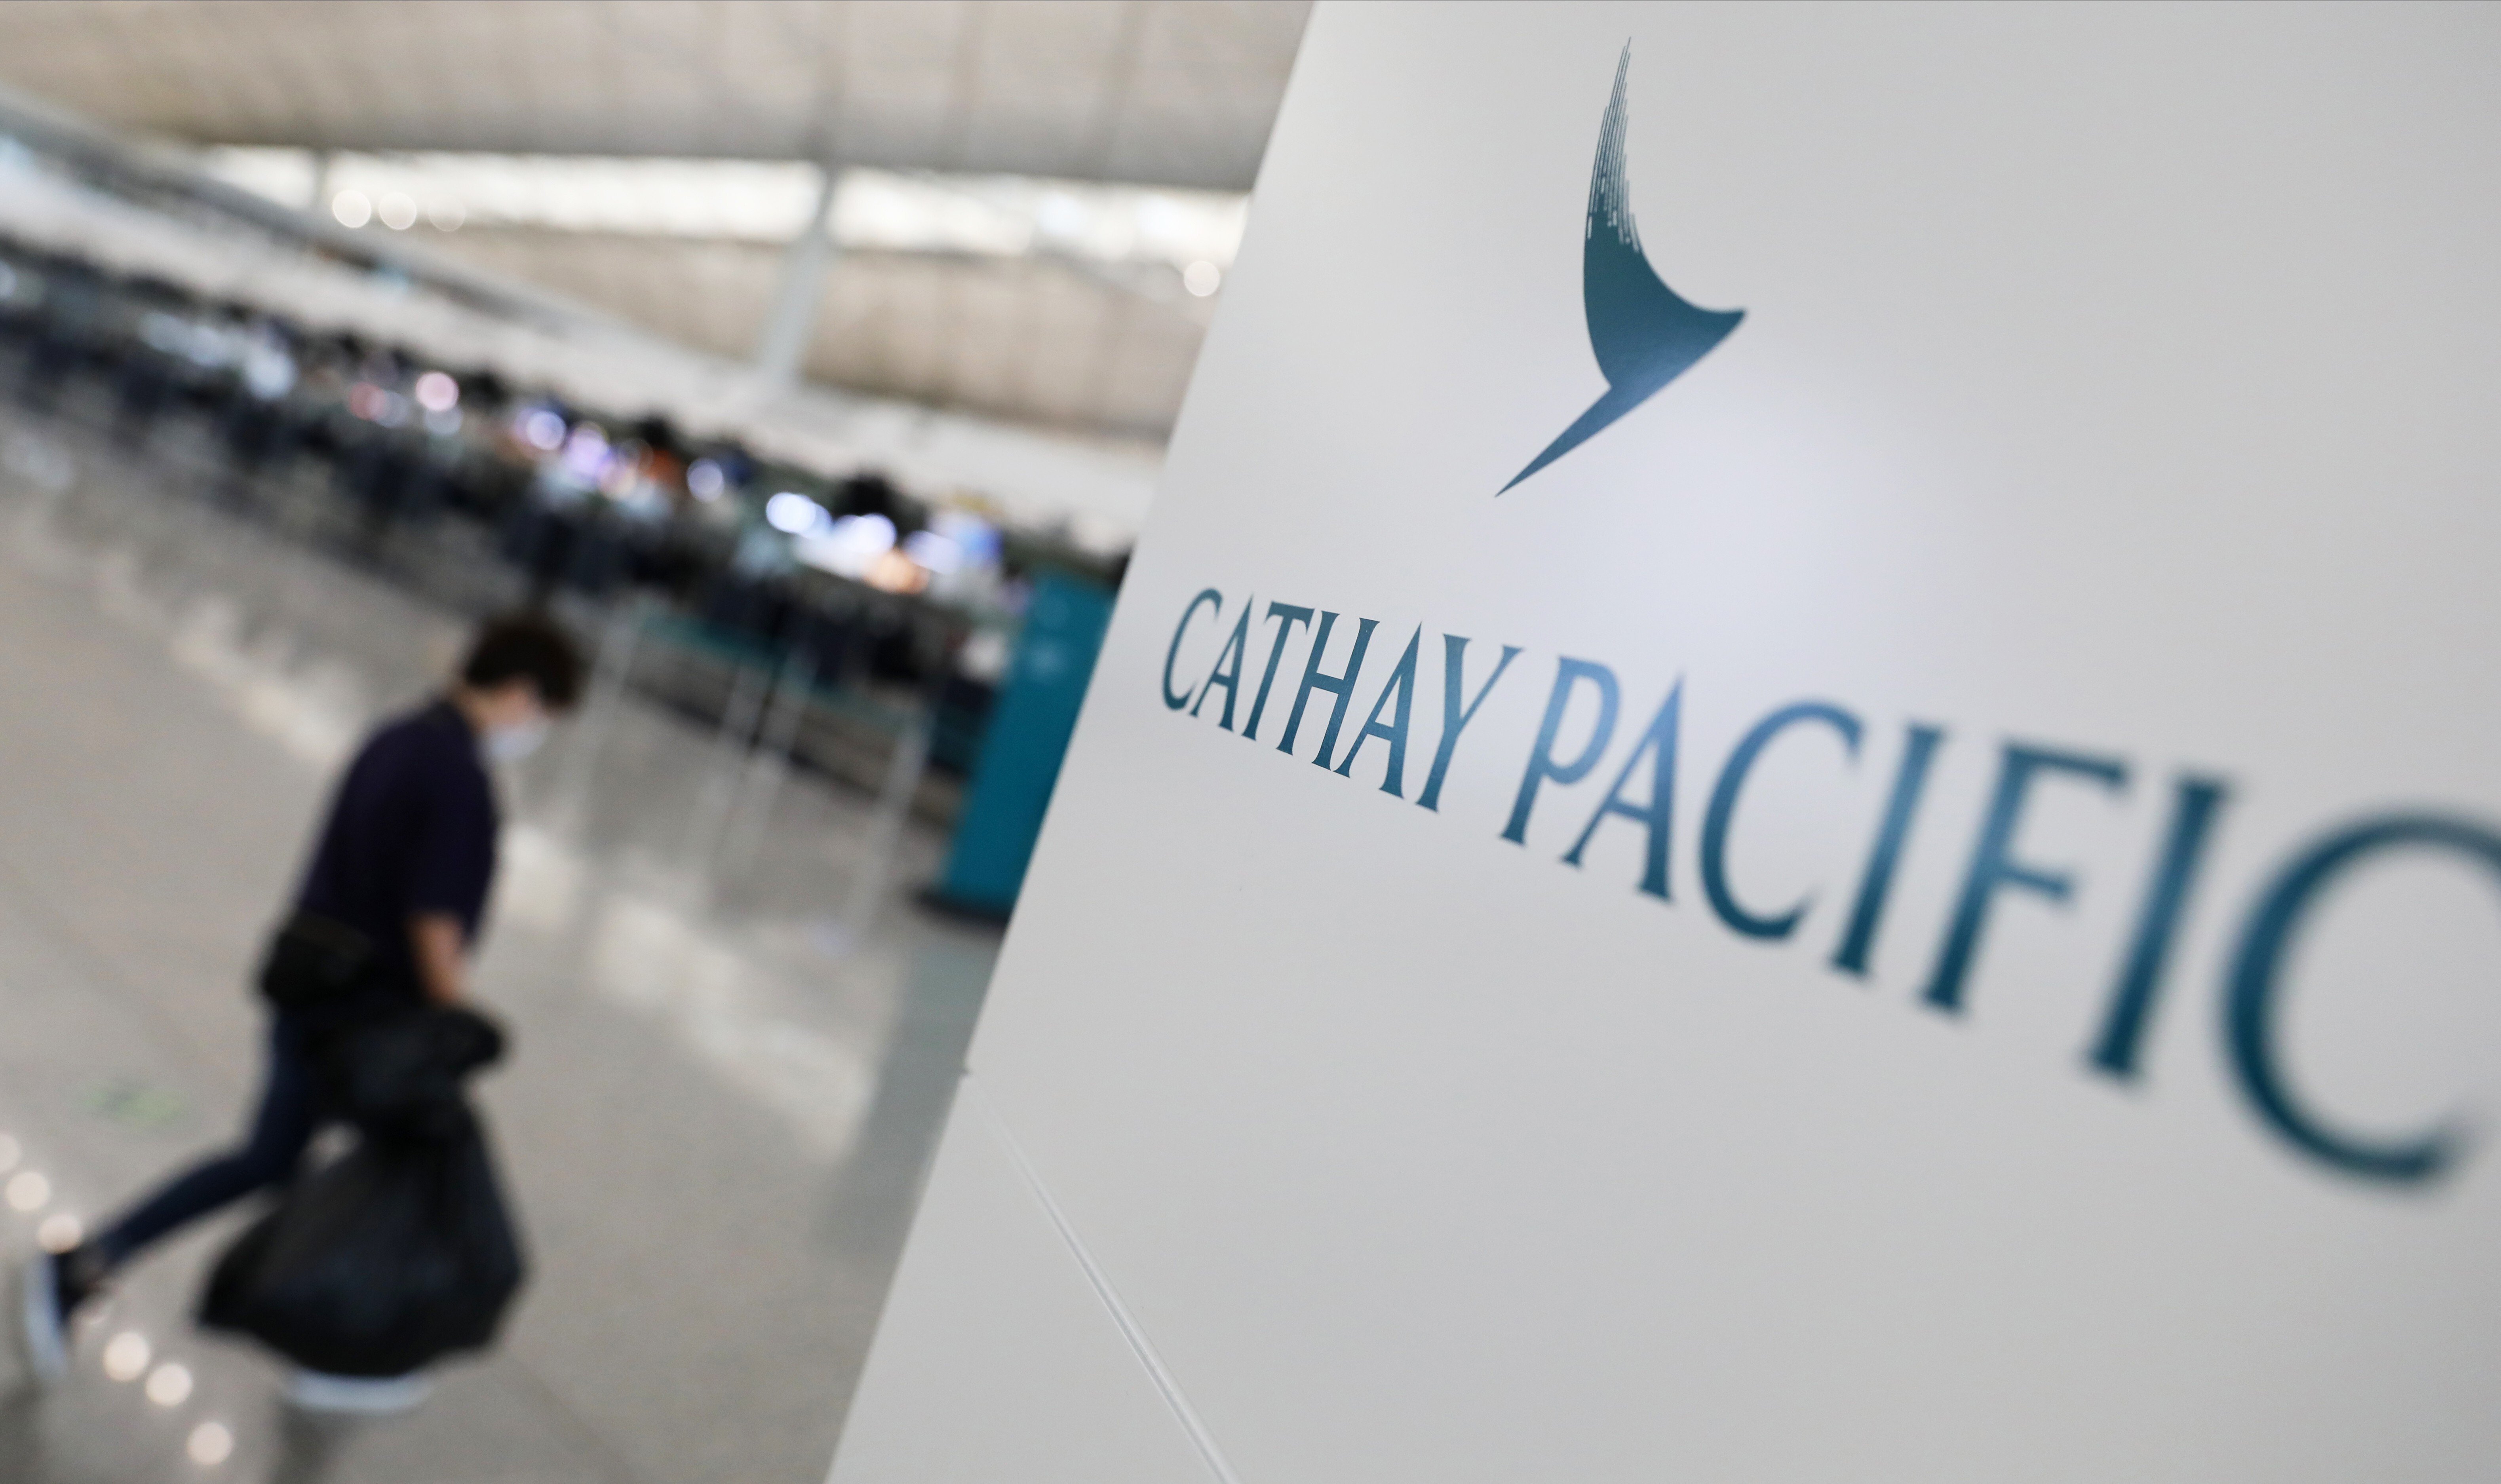 Cathay Pacific has said the plan to impose quarantine on aircrew could hurt its passenger and cargo business. Photo: Nora Tam